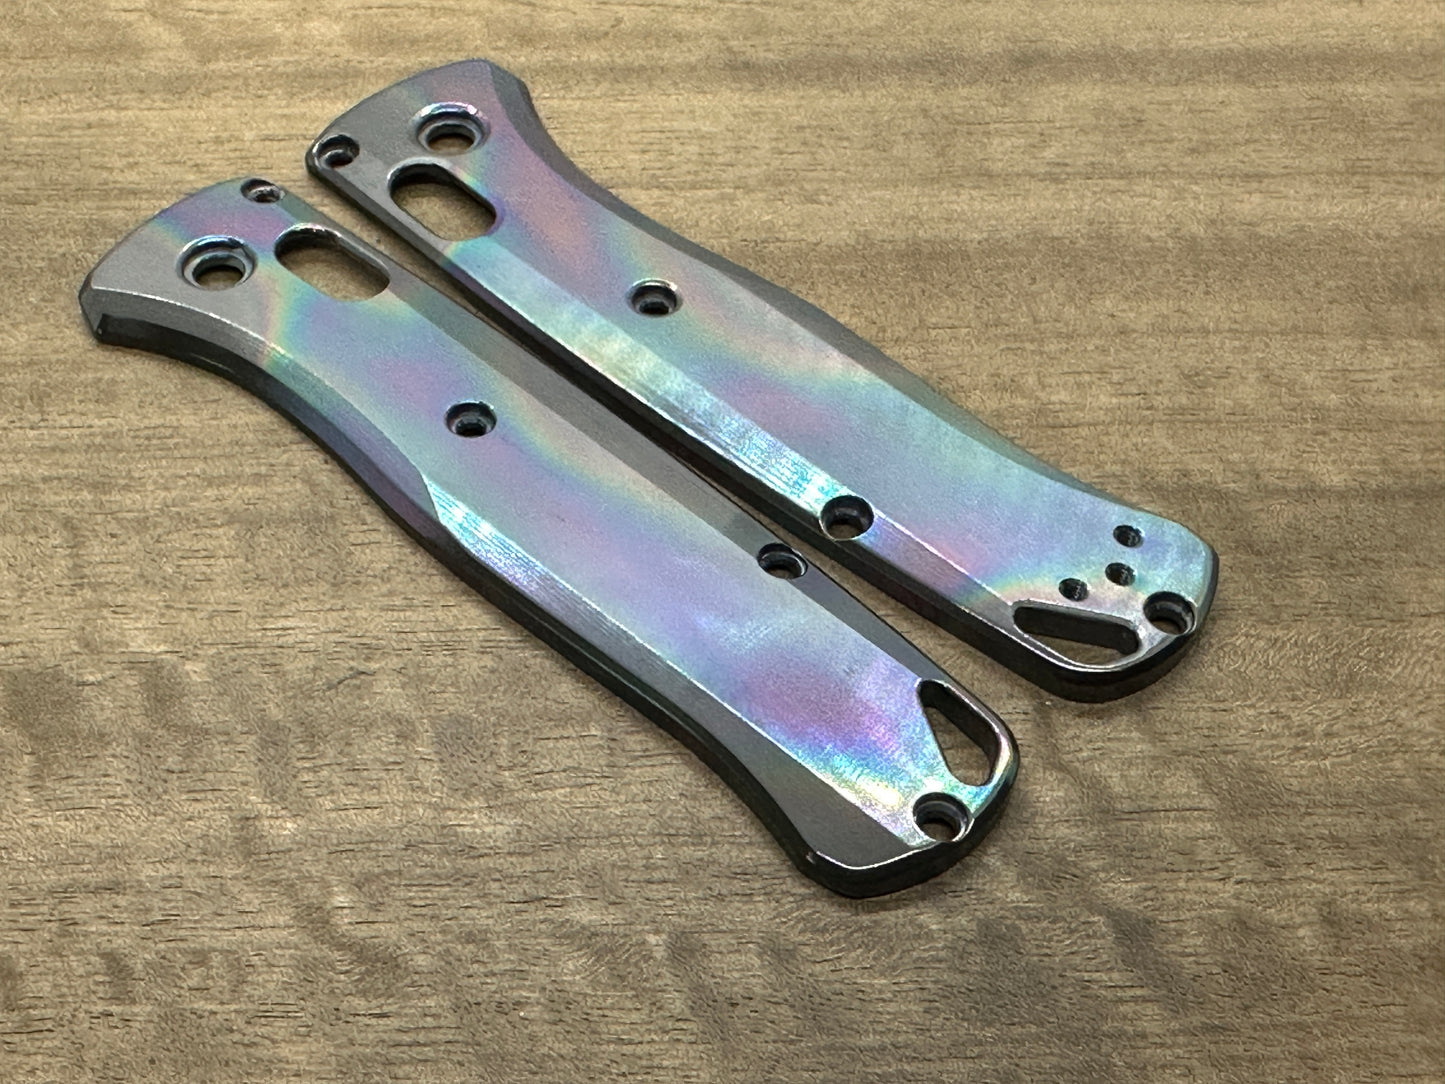 OIL SLICK Polished Zirconium Scales for Benchmade Bugout 535